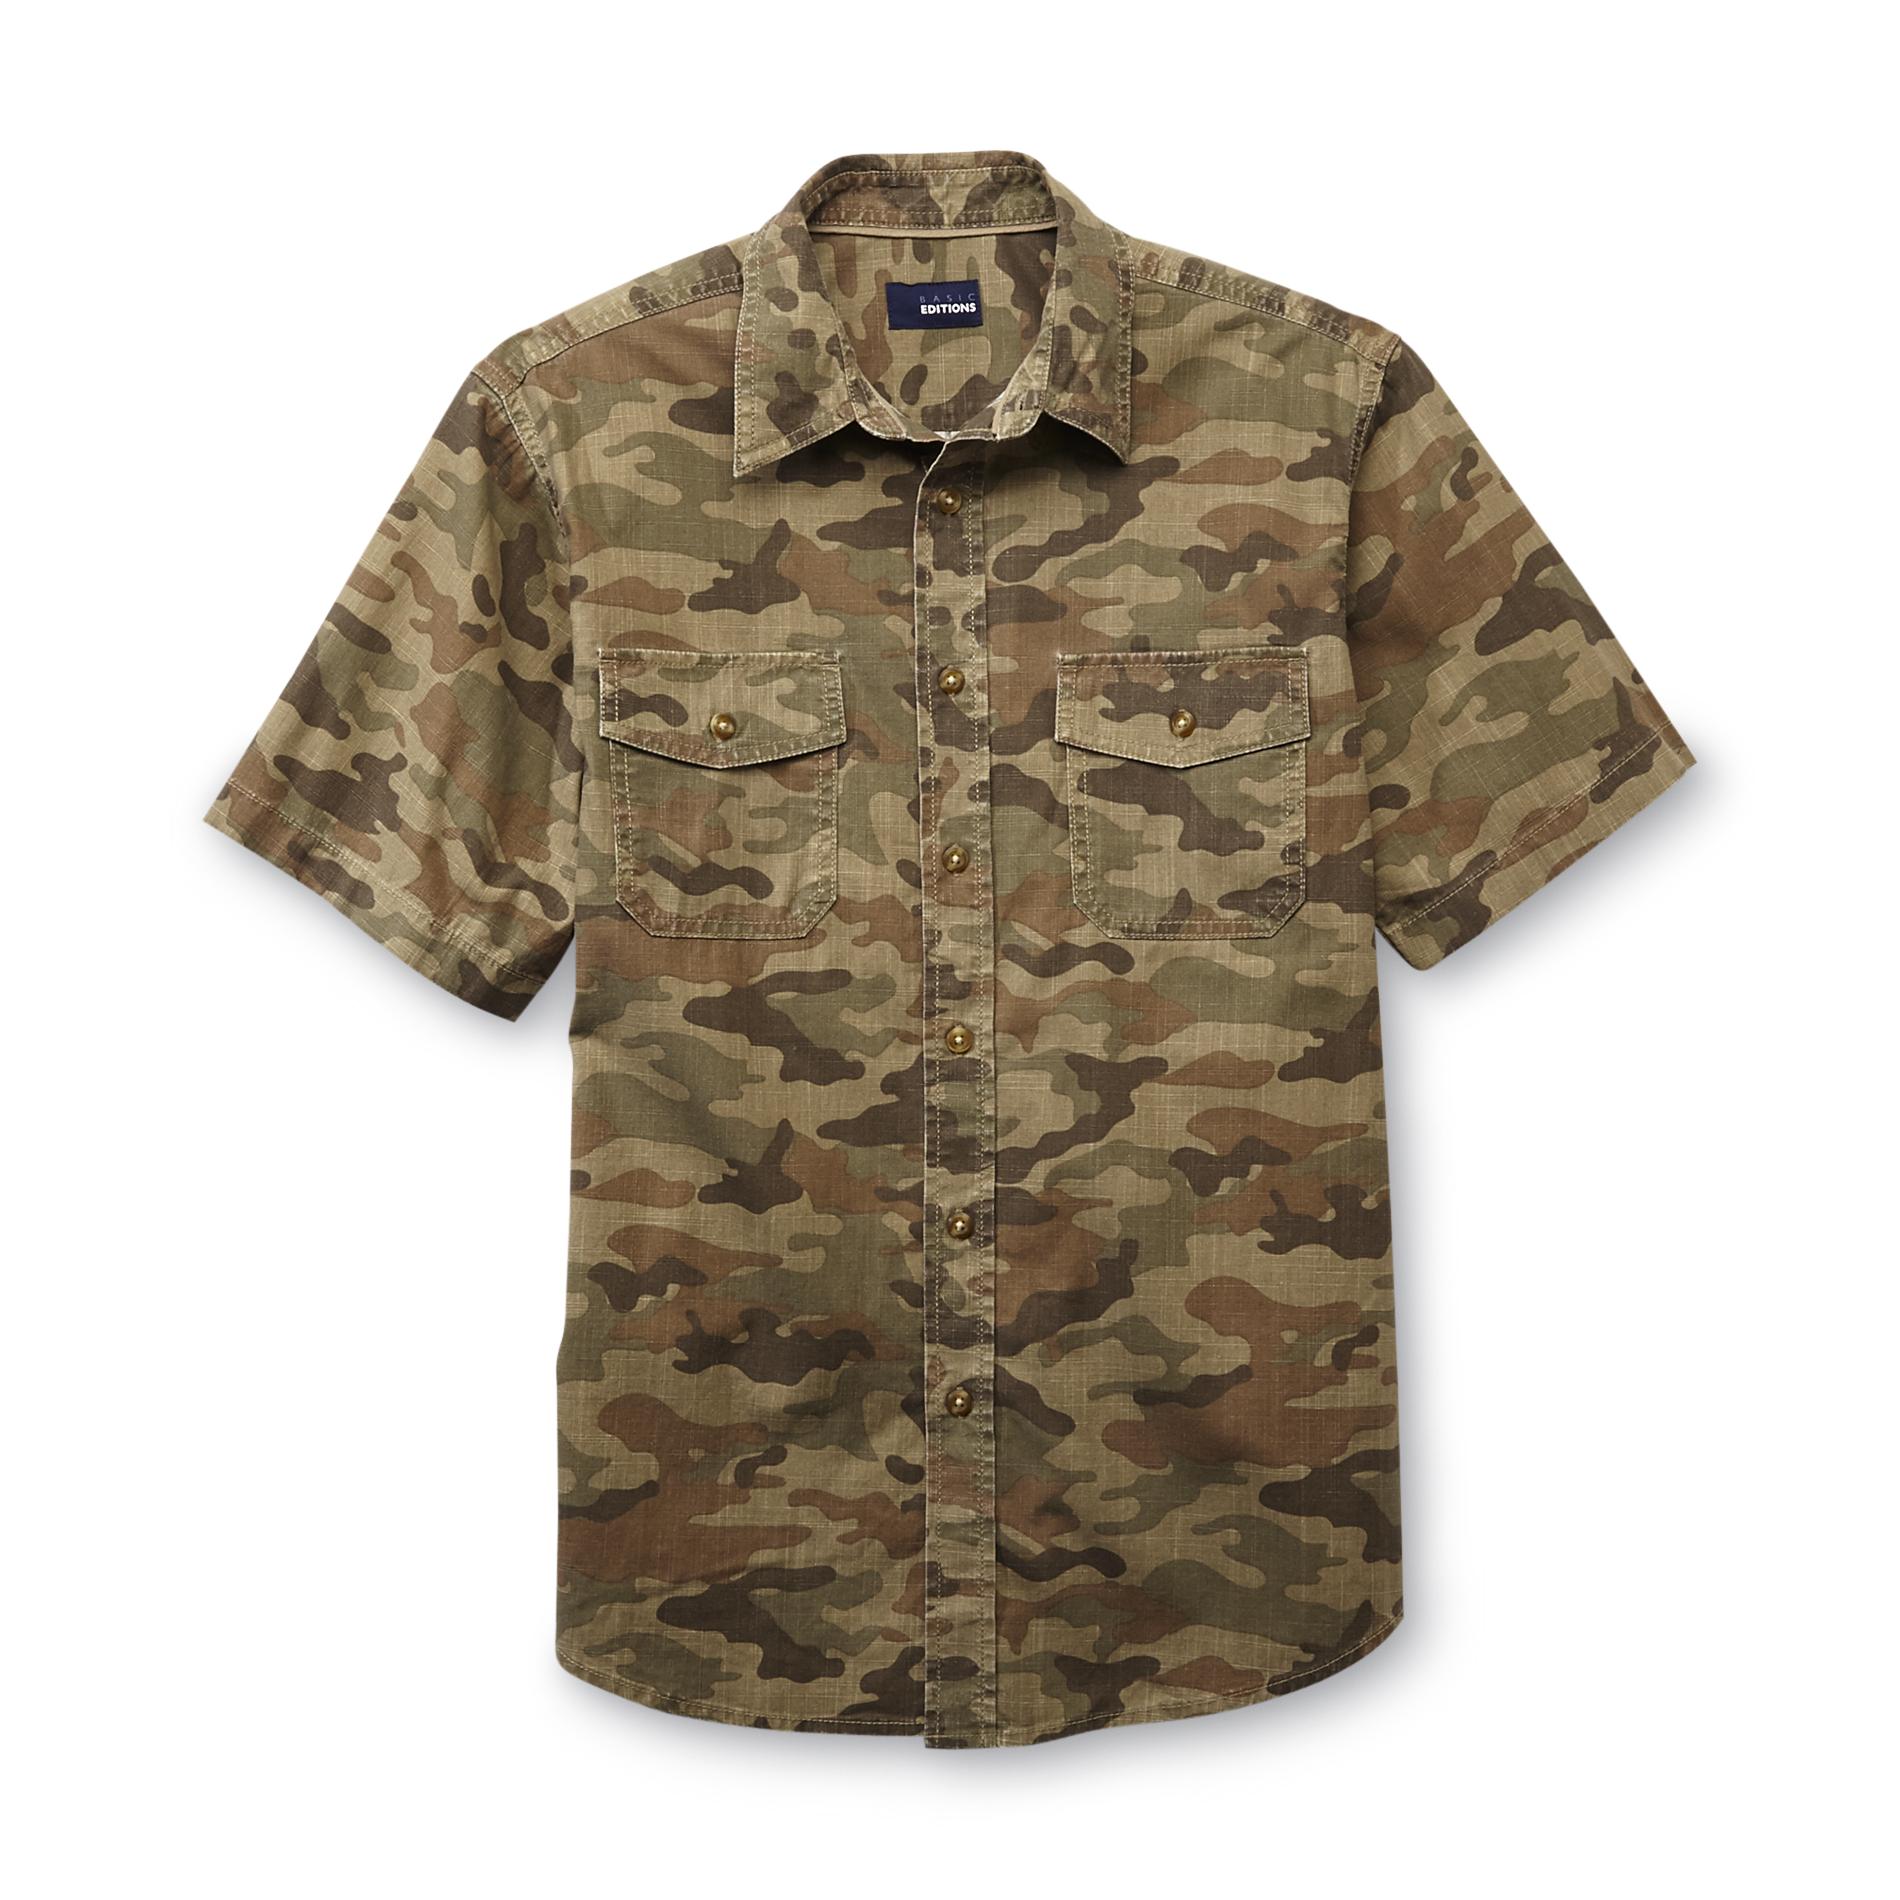 Basic Editions Men's Short-Sleeve Woven Shirt - Camouflage